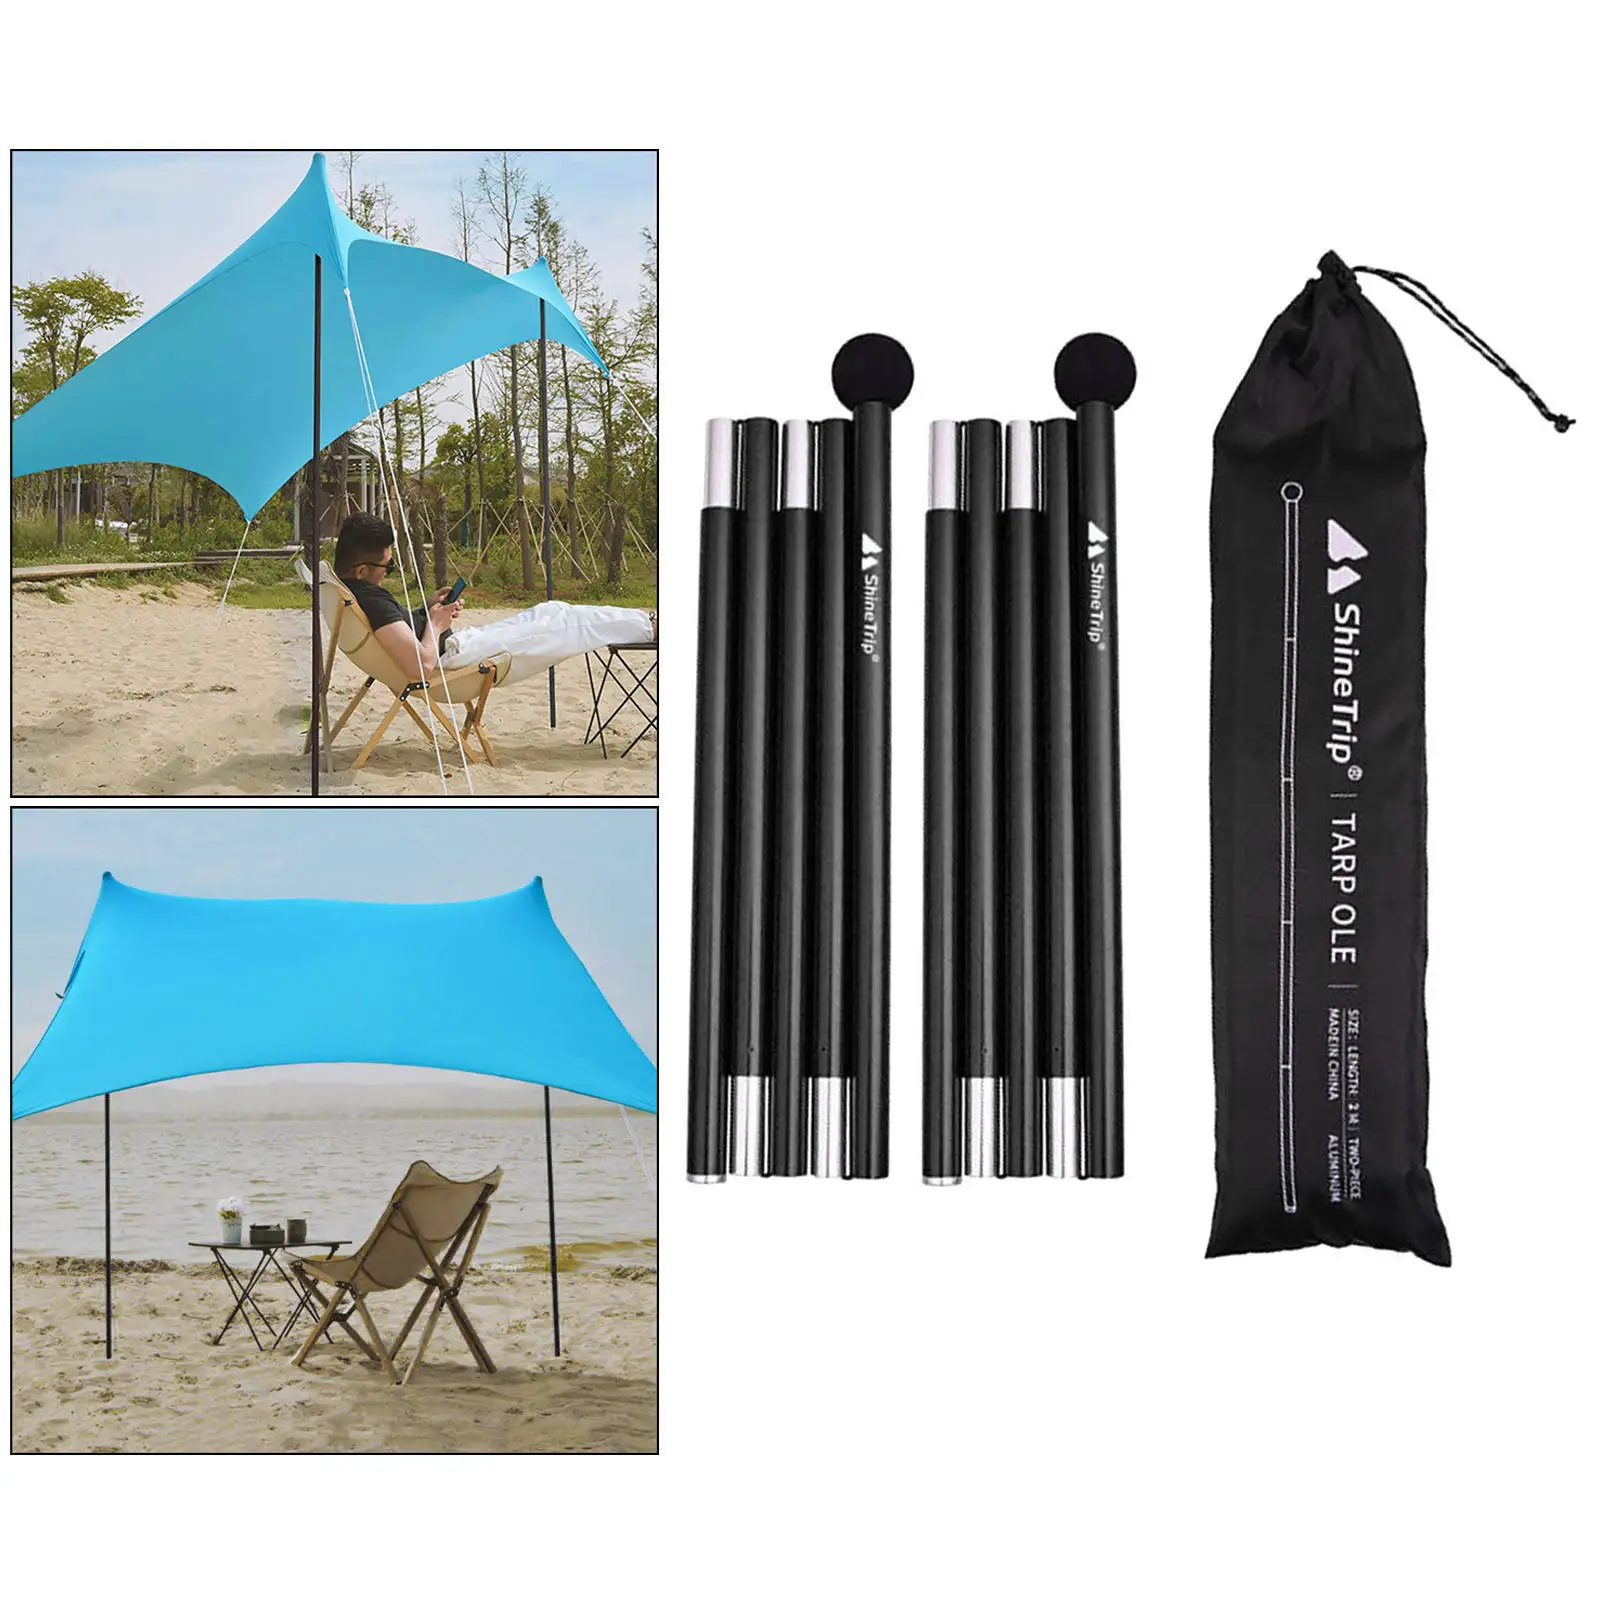 2pcs Telescoping Tarp Poles Tent Rods Adjustable Awning Canopy Tarp Support Pole Folding Tent Replacement Pole Rainfly RODS